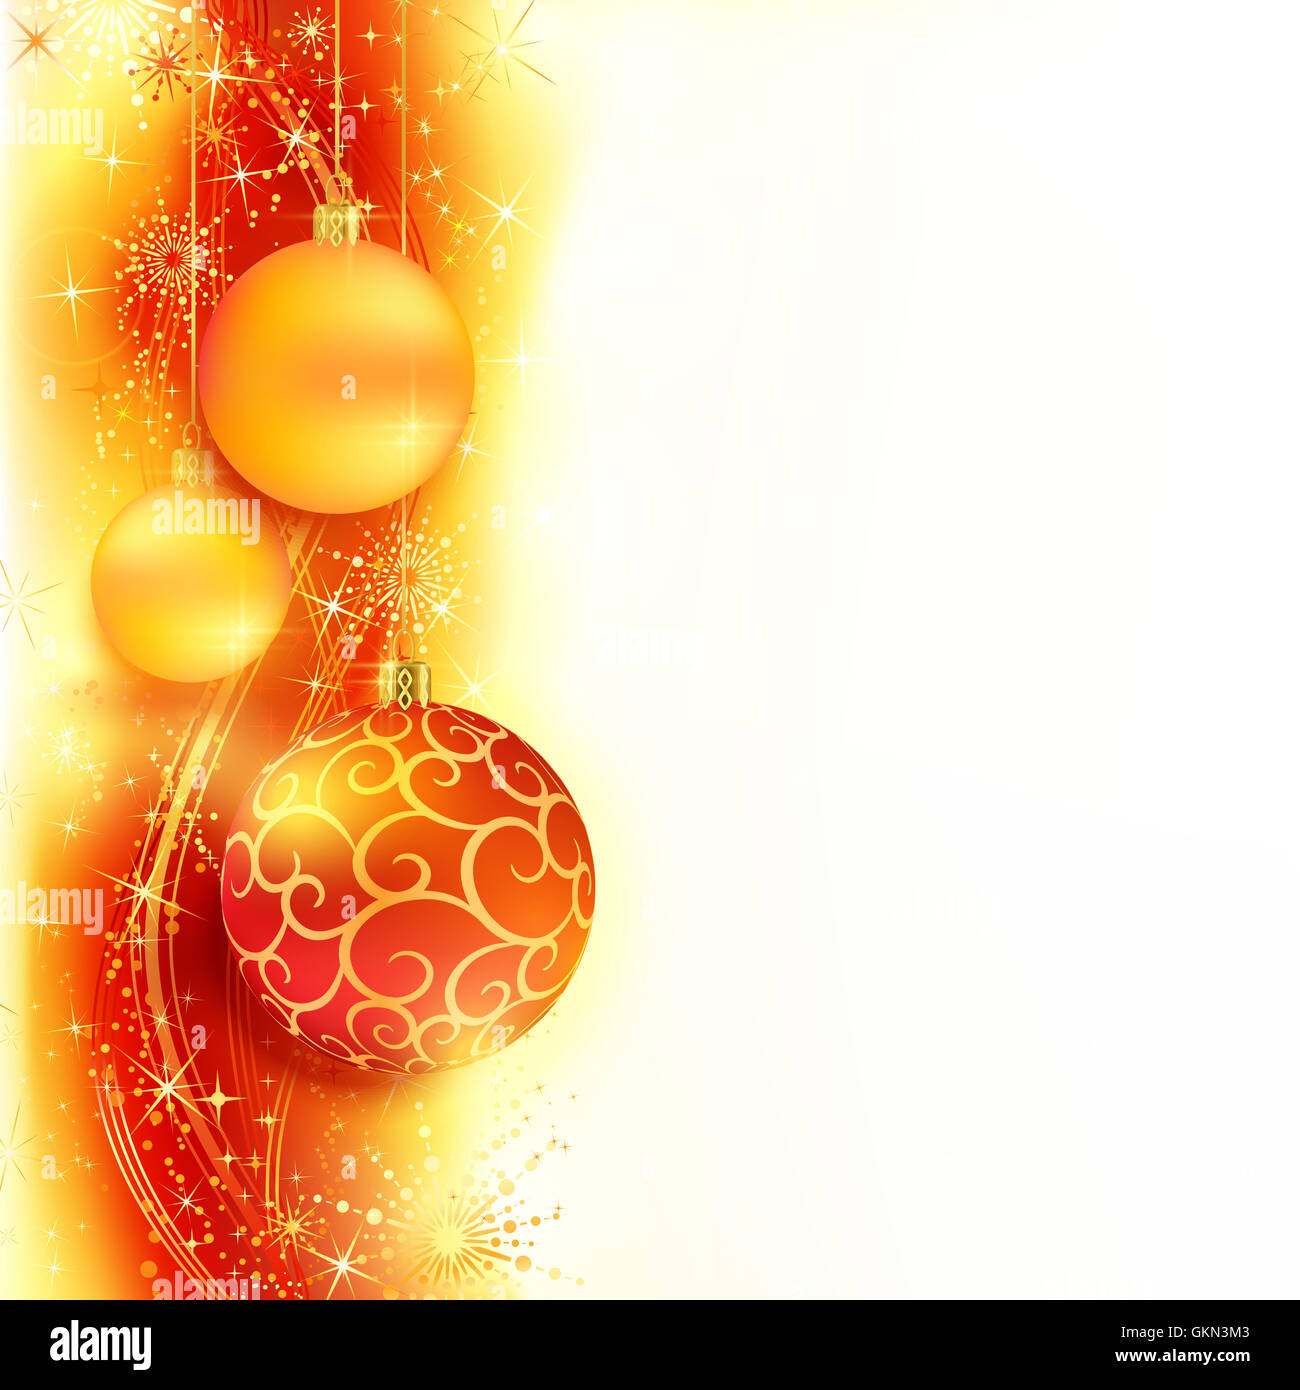 Red golden Christmas background with hanging Christmas balls Stock Photo